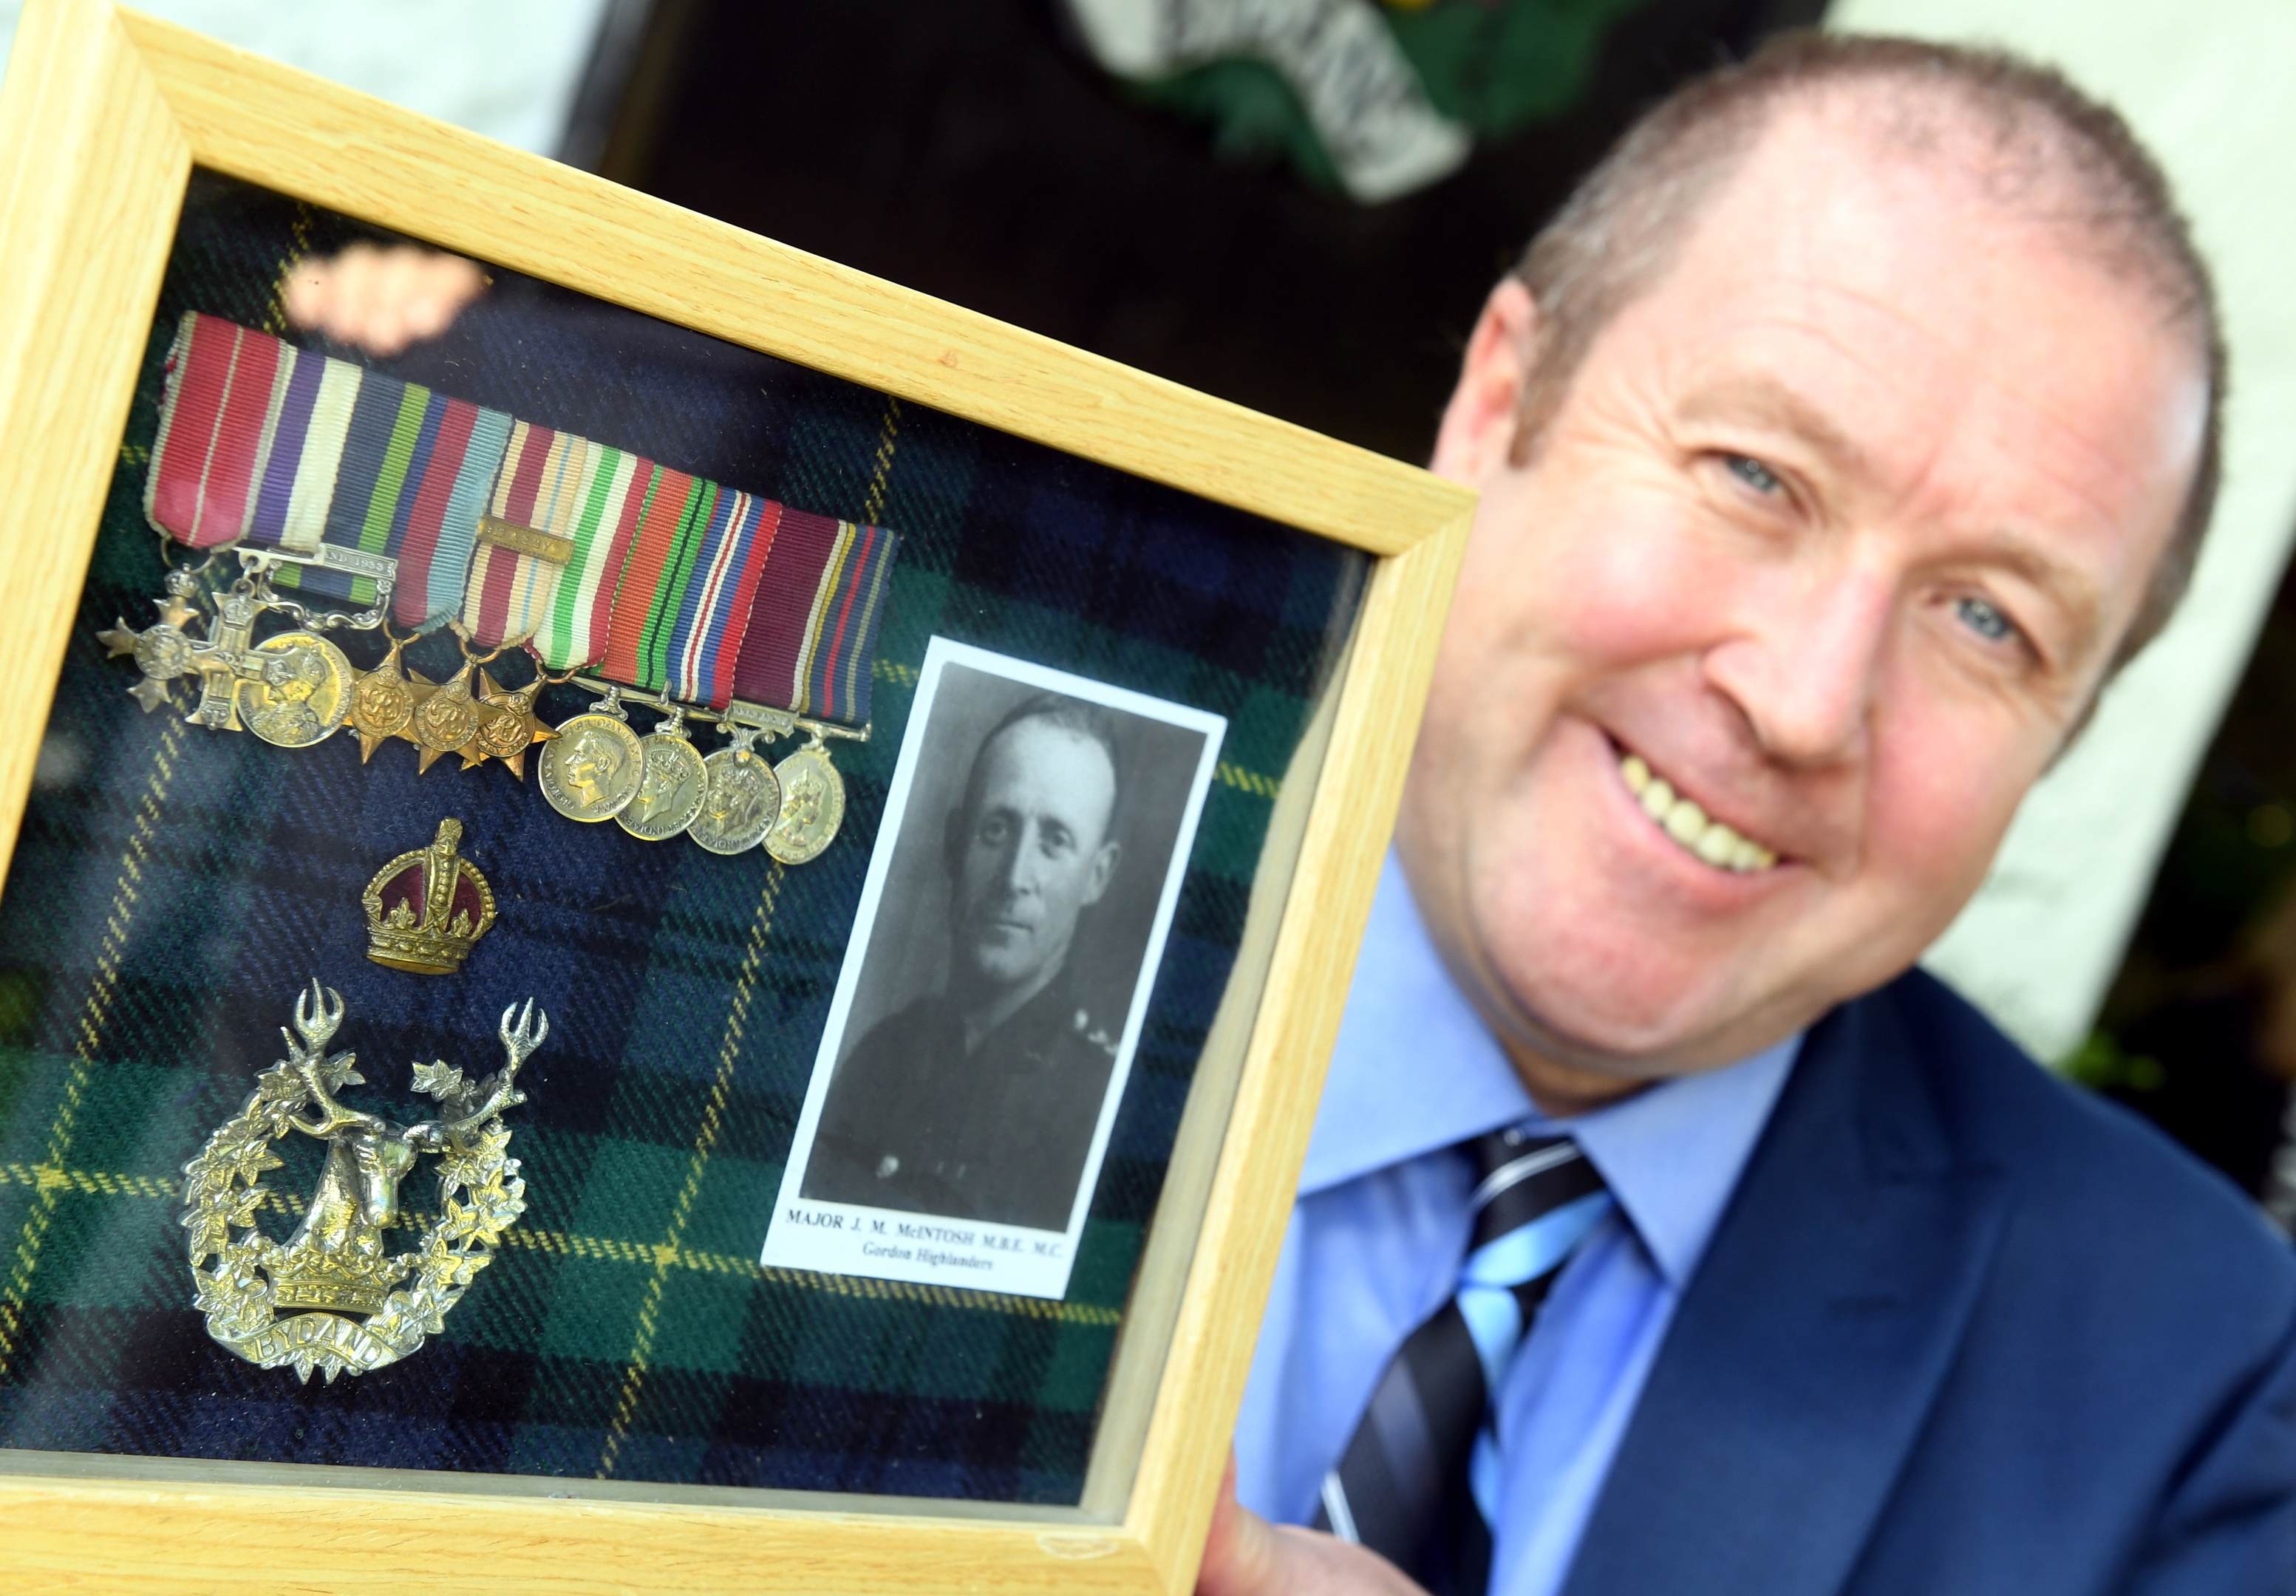 Veterans Minister Graeme Dey visited the Gordon Highlanders Museum, Aberdeen, where after meeting with war veterans he presented his grandfather Major James M McIntosh's medals to display as a long term loan.